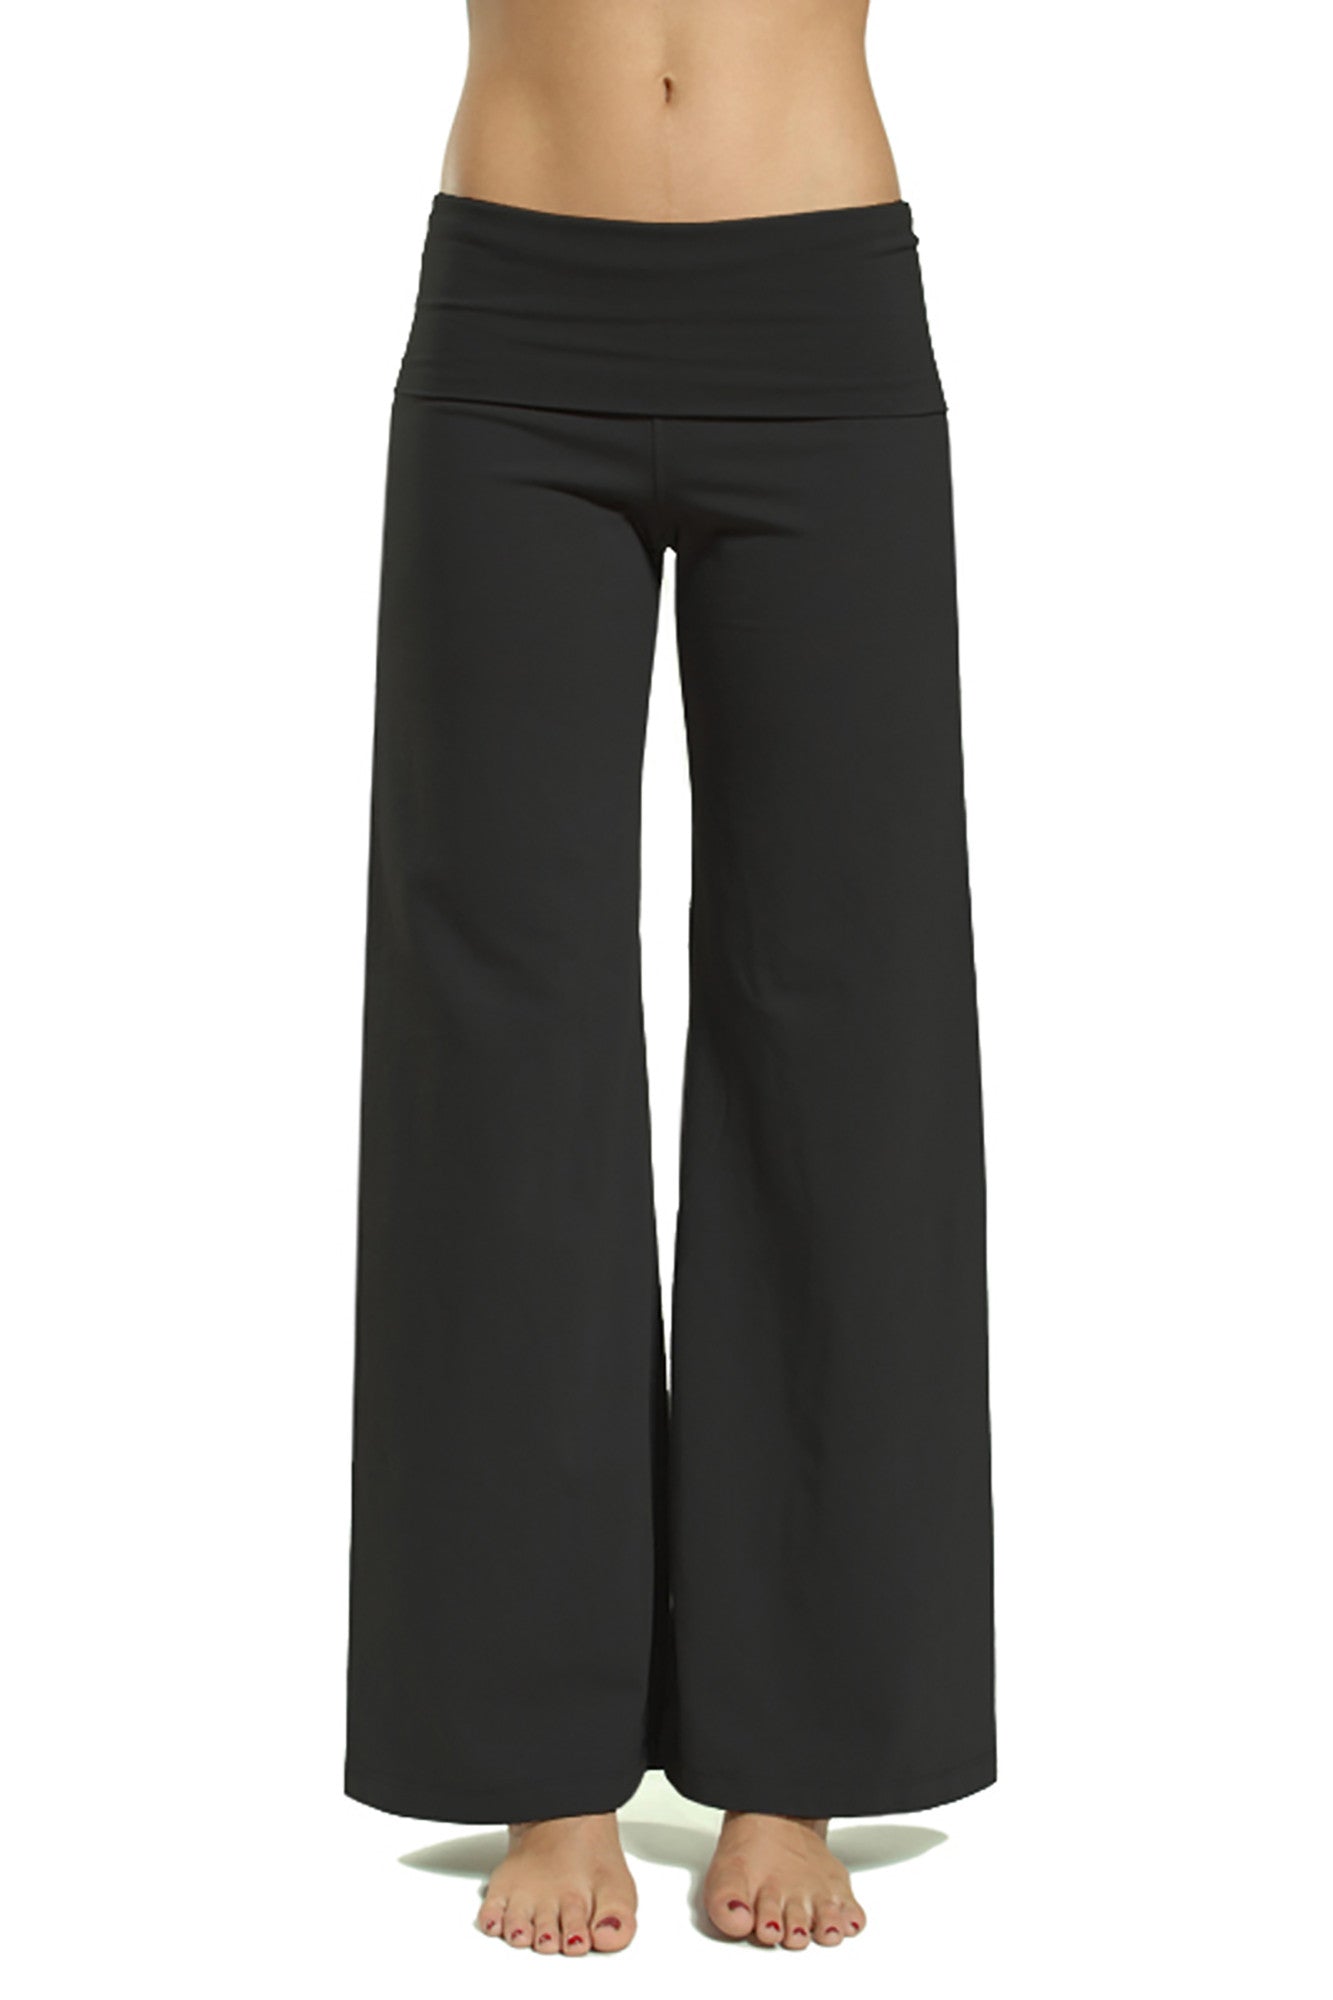 Wide Leg Roll Down Pants (Style W-326, Black) by Hard Tail Forever